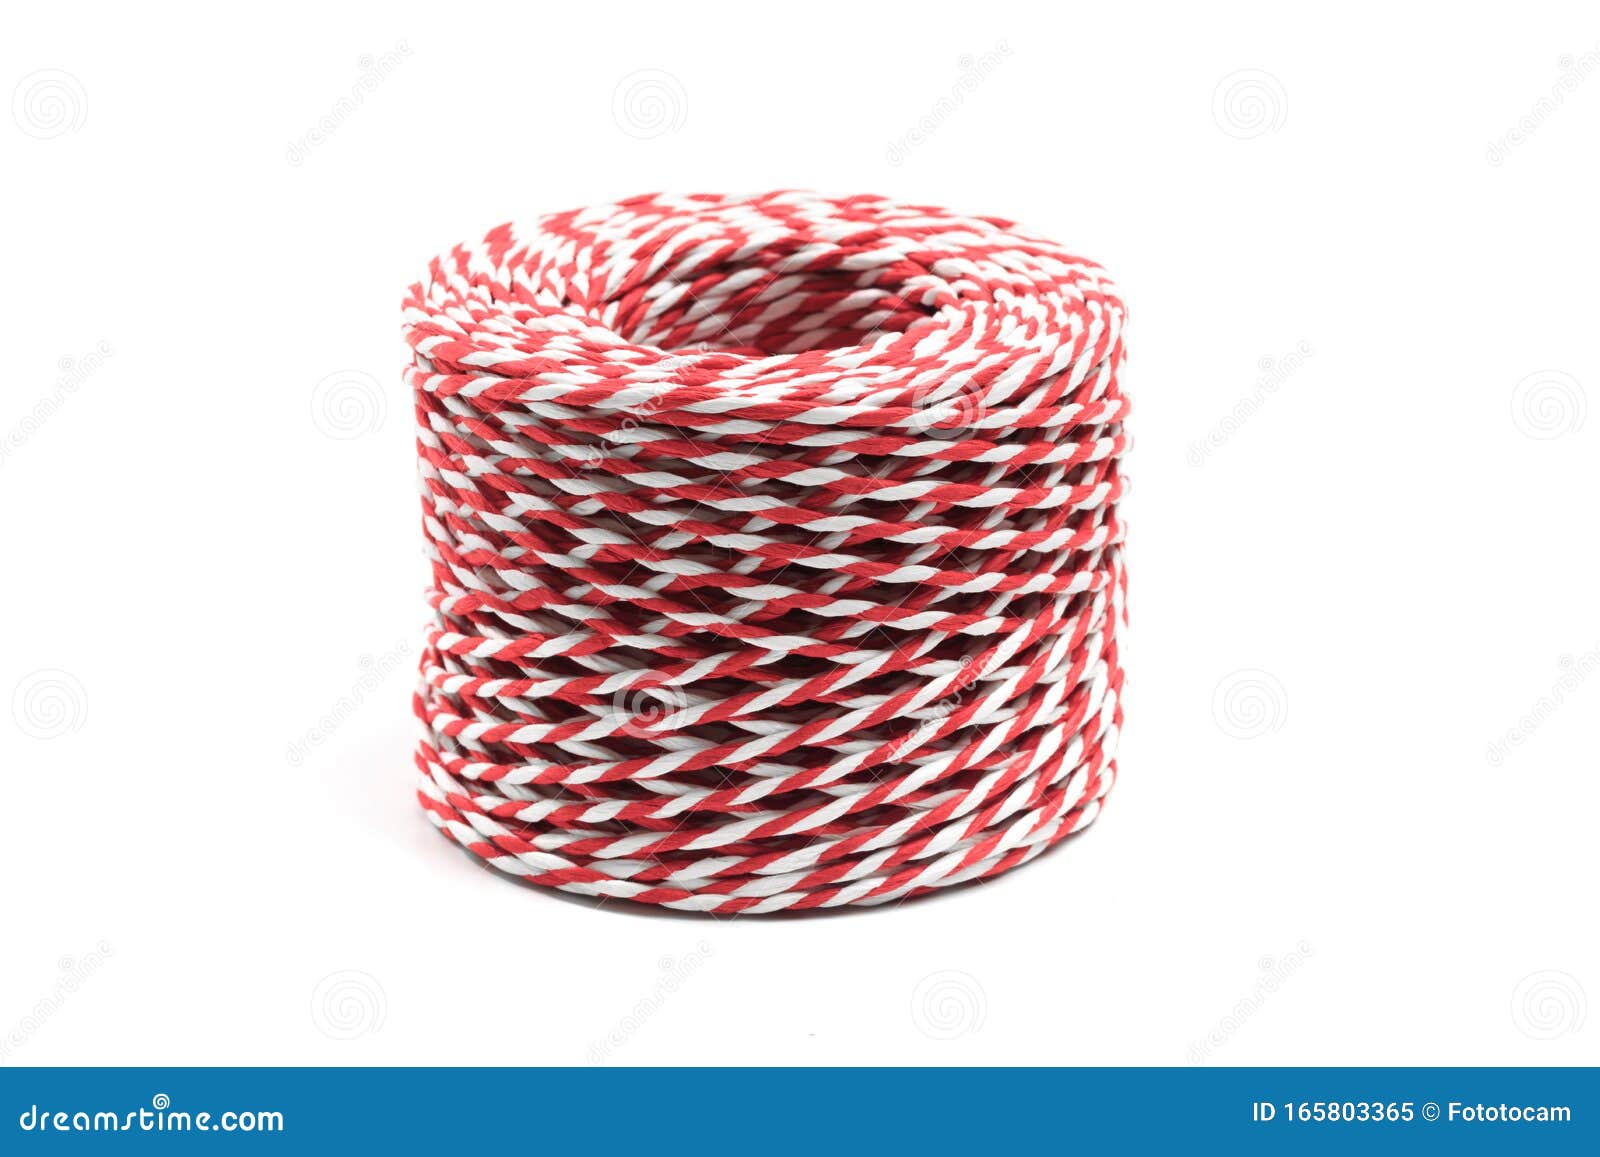 https://thumbs.dreamstime.com/z/red-white-bakers-twine-rope-spool-isolated-white-background-red-white-bakers-twine-rope-spool-isolated-white-165803365.jpg